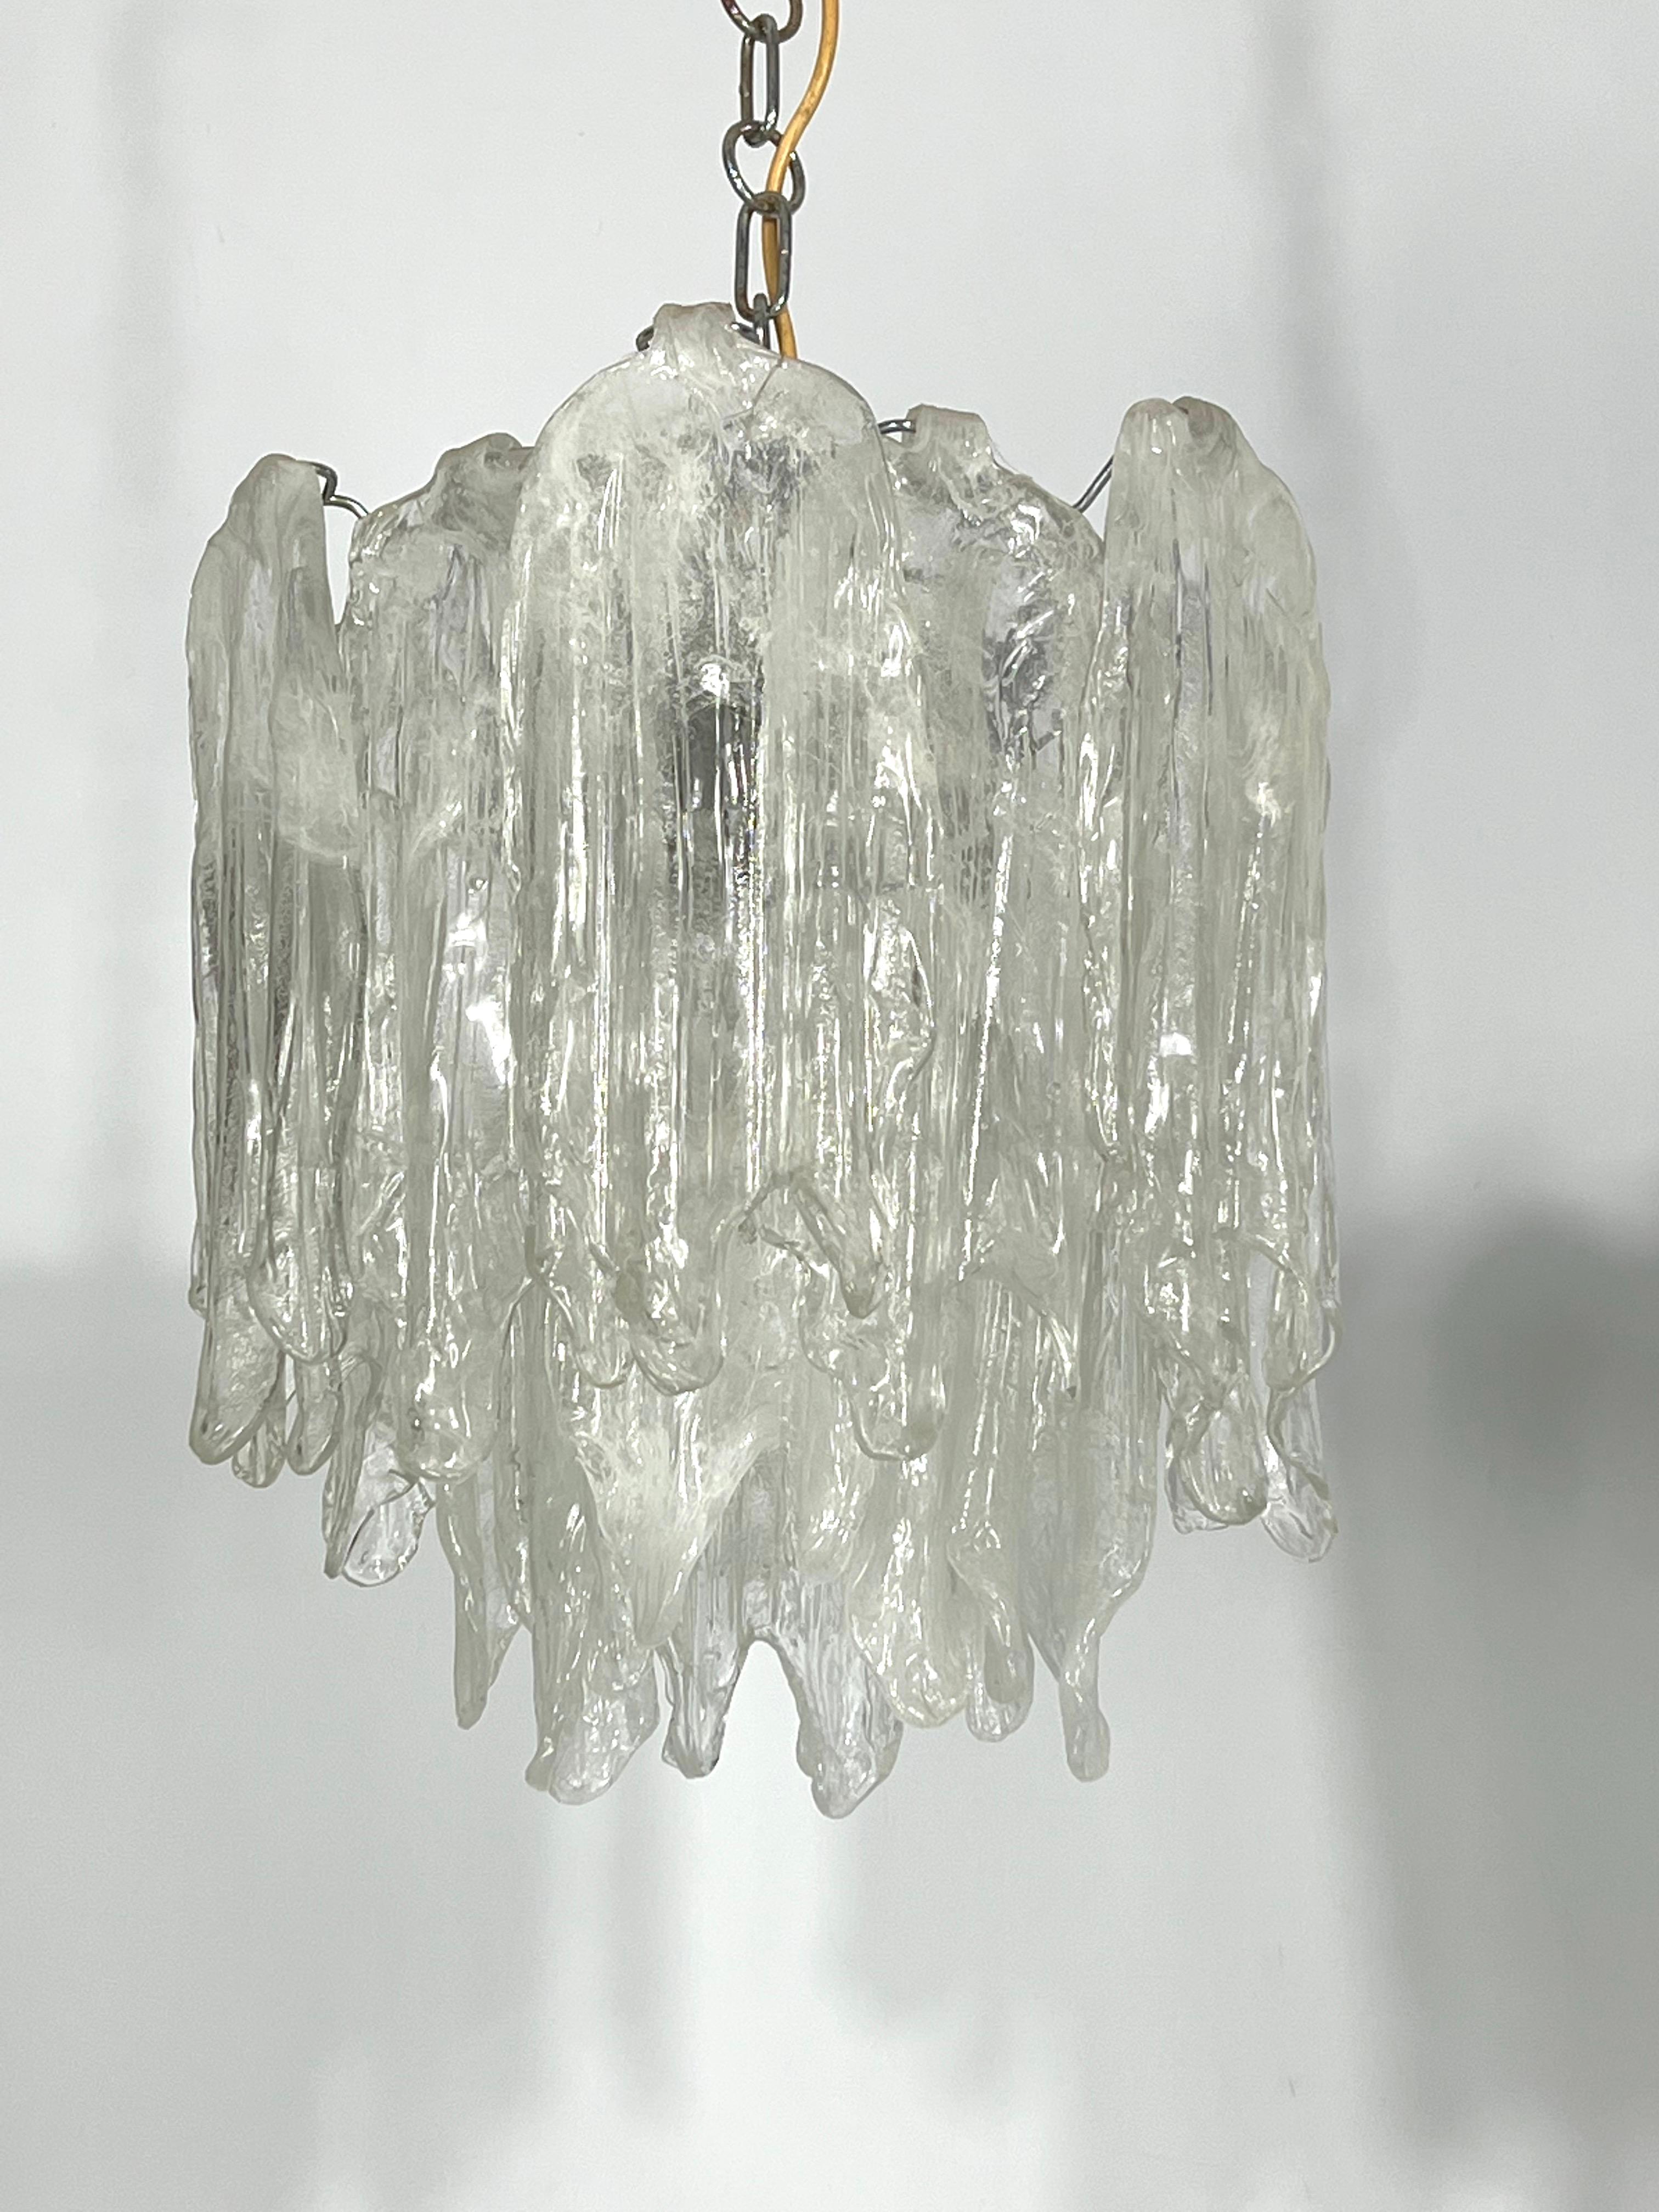 Mazzega Ice glass, pair of vintage murano chandeliers from 70s For Sale 4